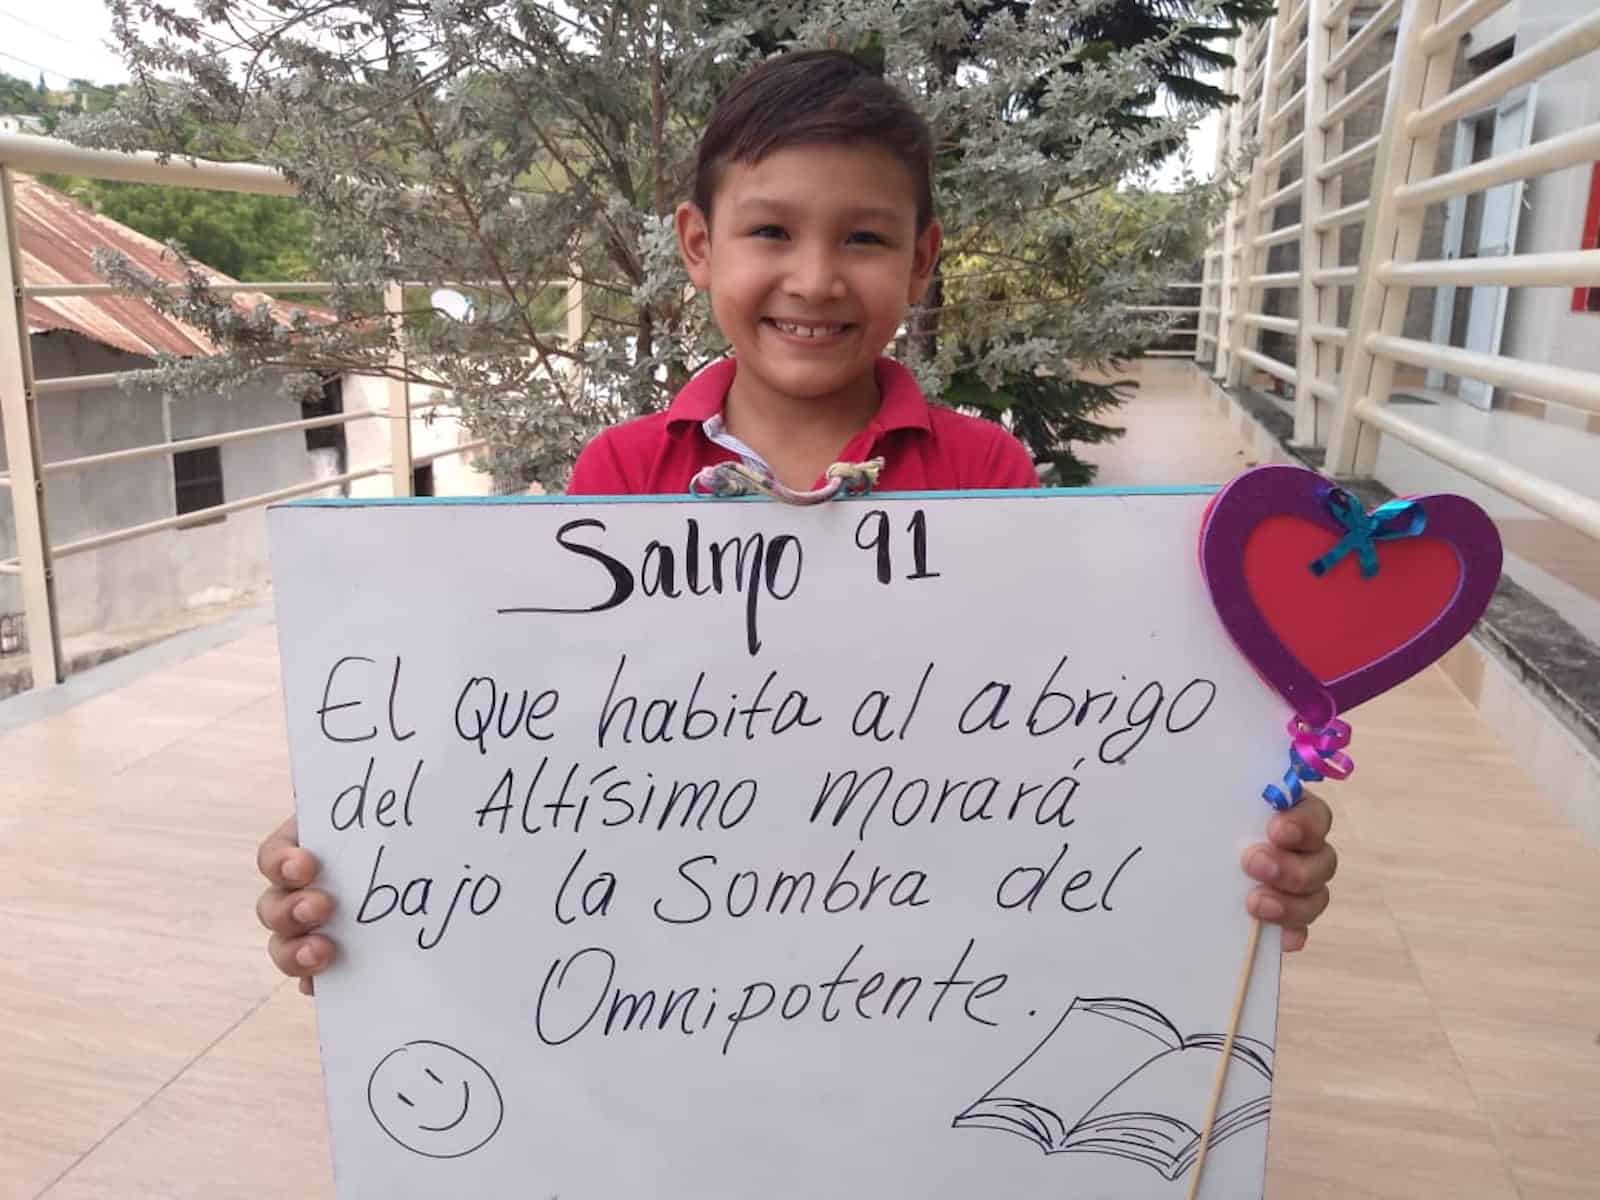 A boy holds a poster with a Bible verse written on it in Spanish.